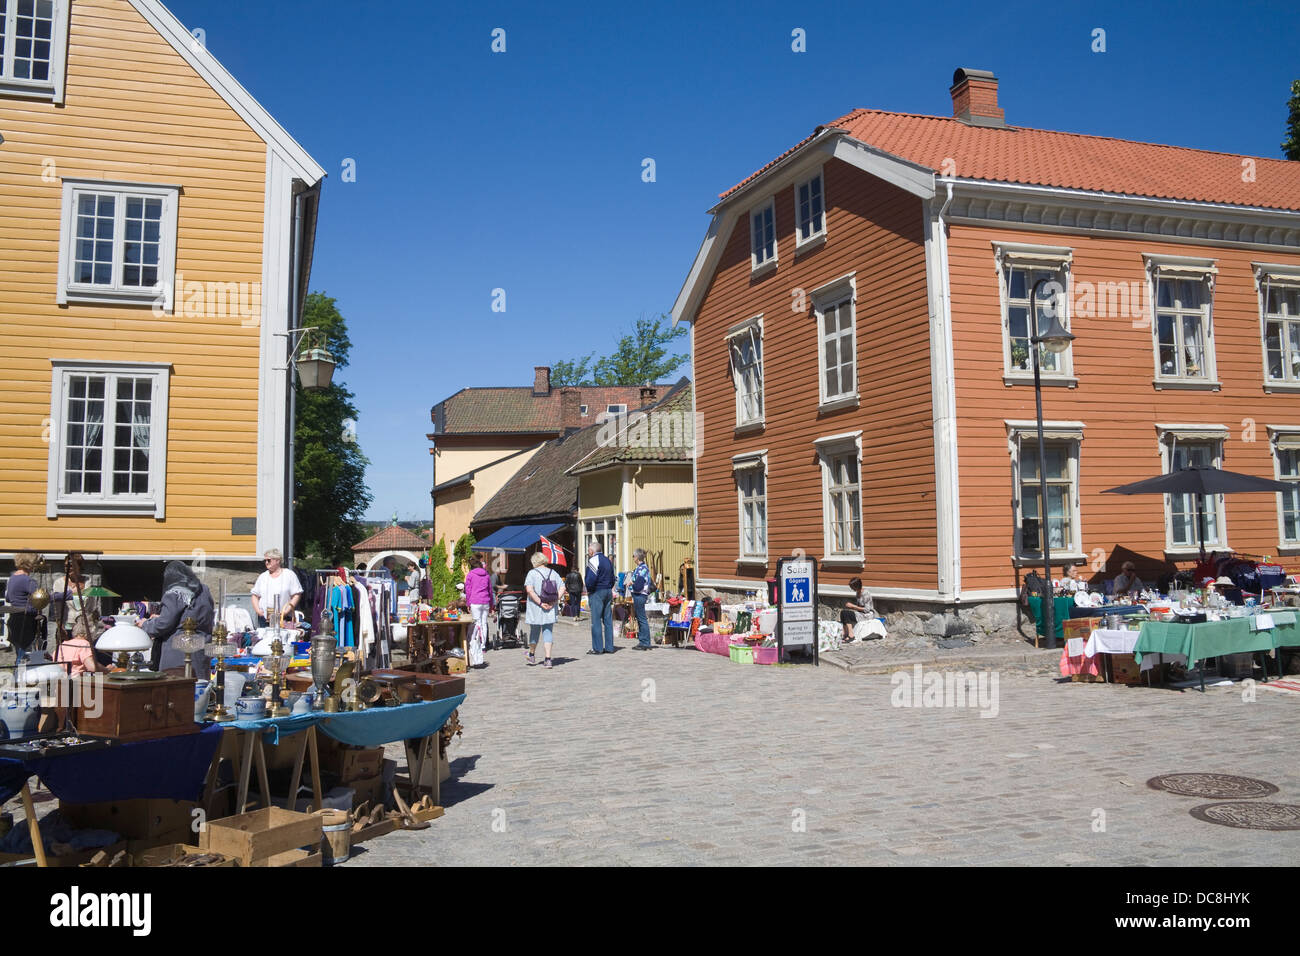 Gamlebyen Fredrikstad Ostfold Norway Customers viewing stalls weekly market in Historic Torvet central square old fortified city Stock Photo